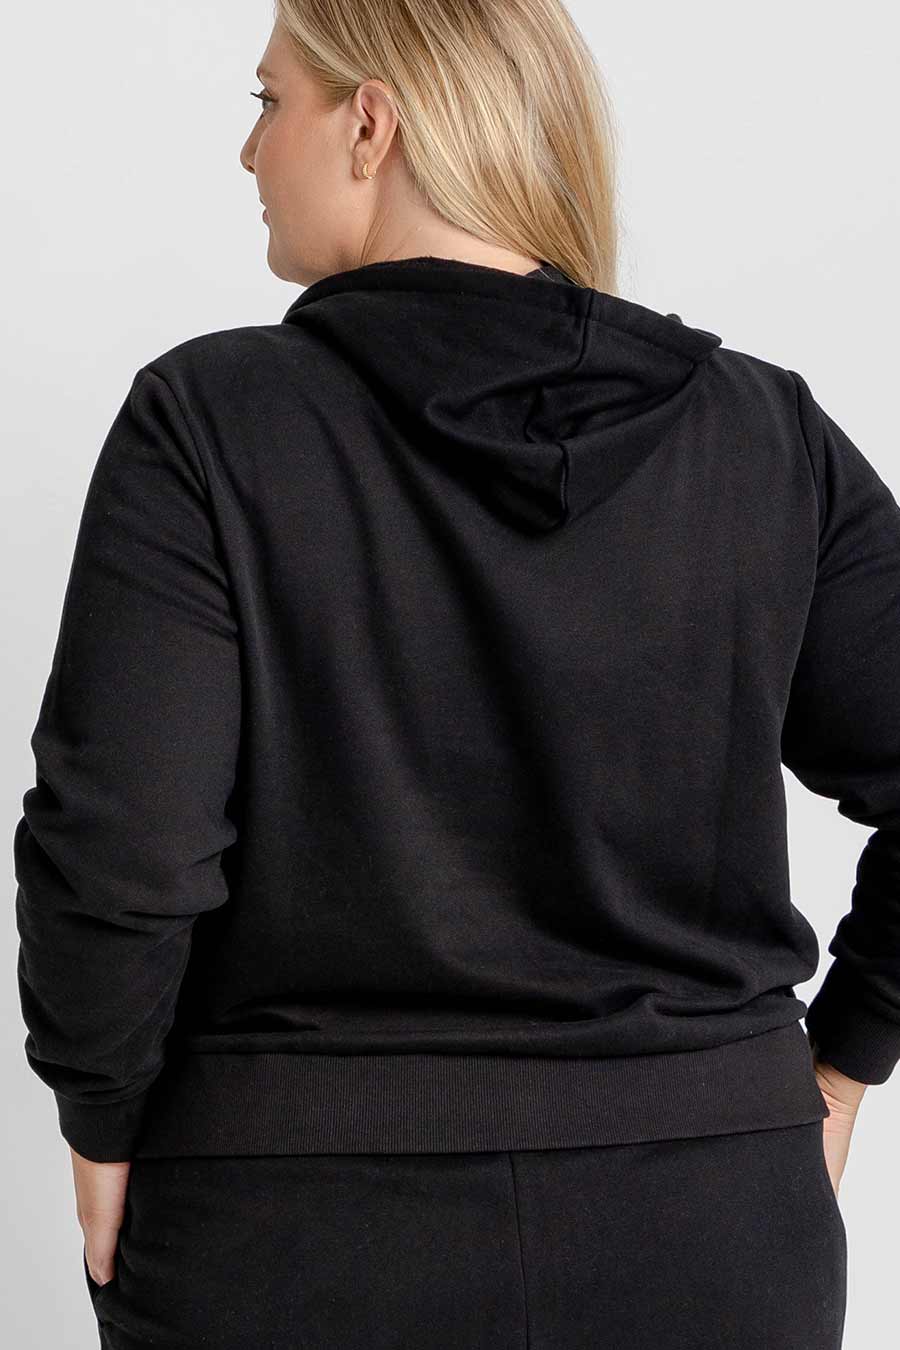 Everyday Hoodie - Black from Active Truth™
